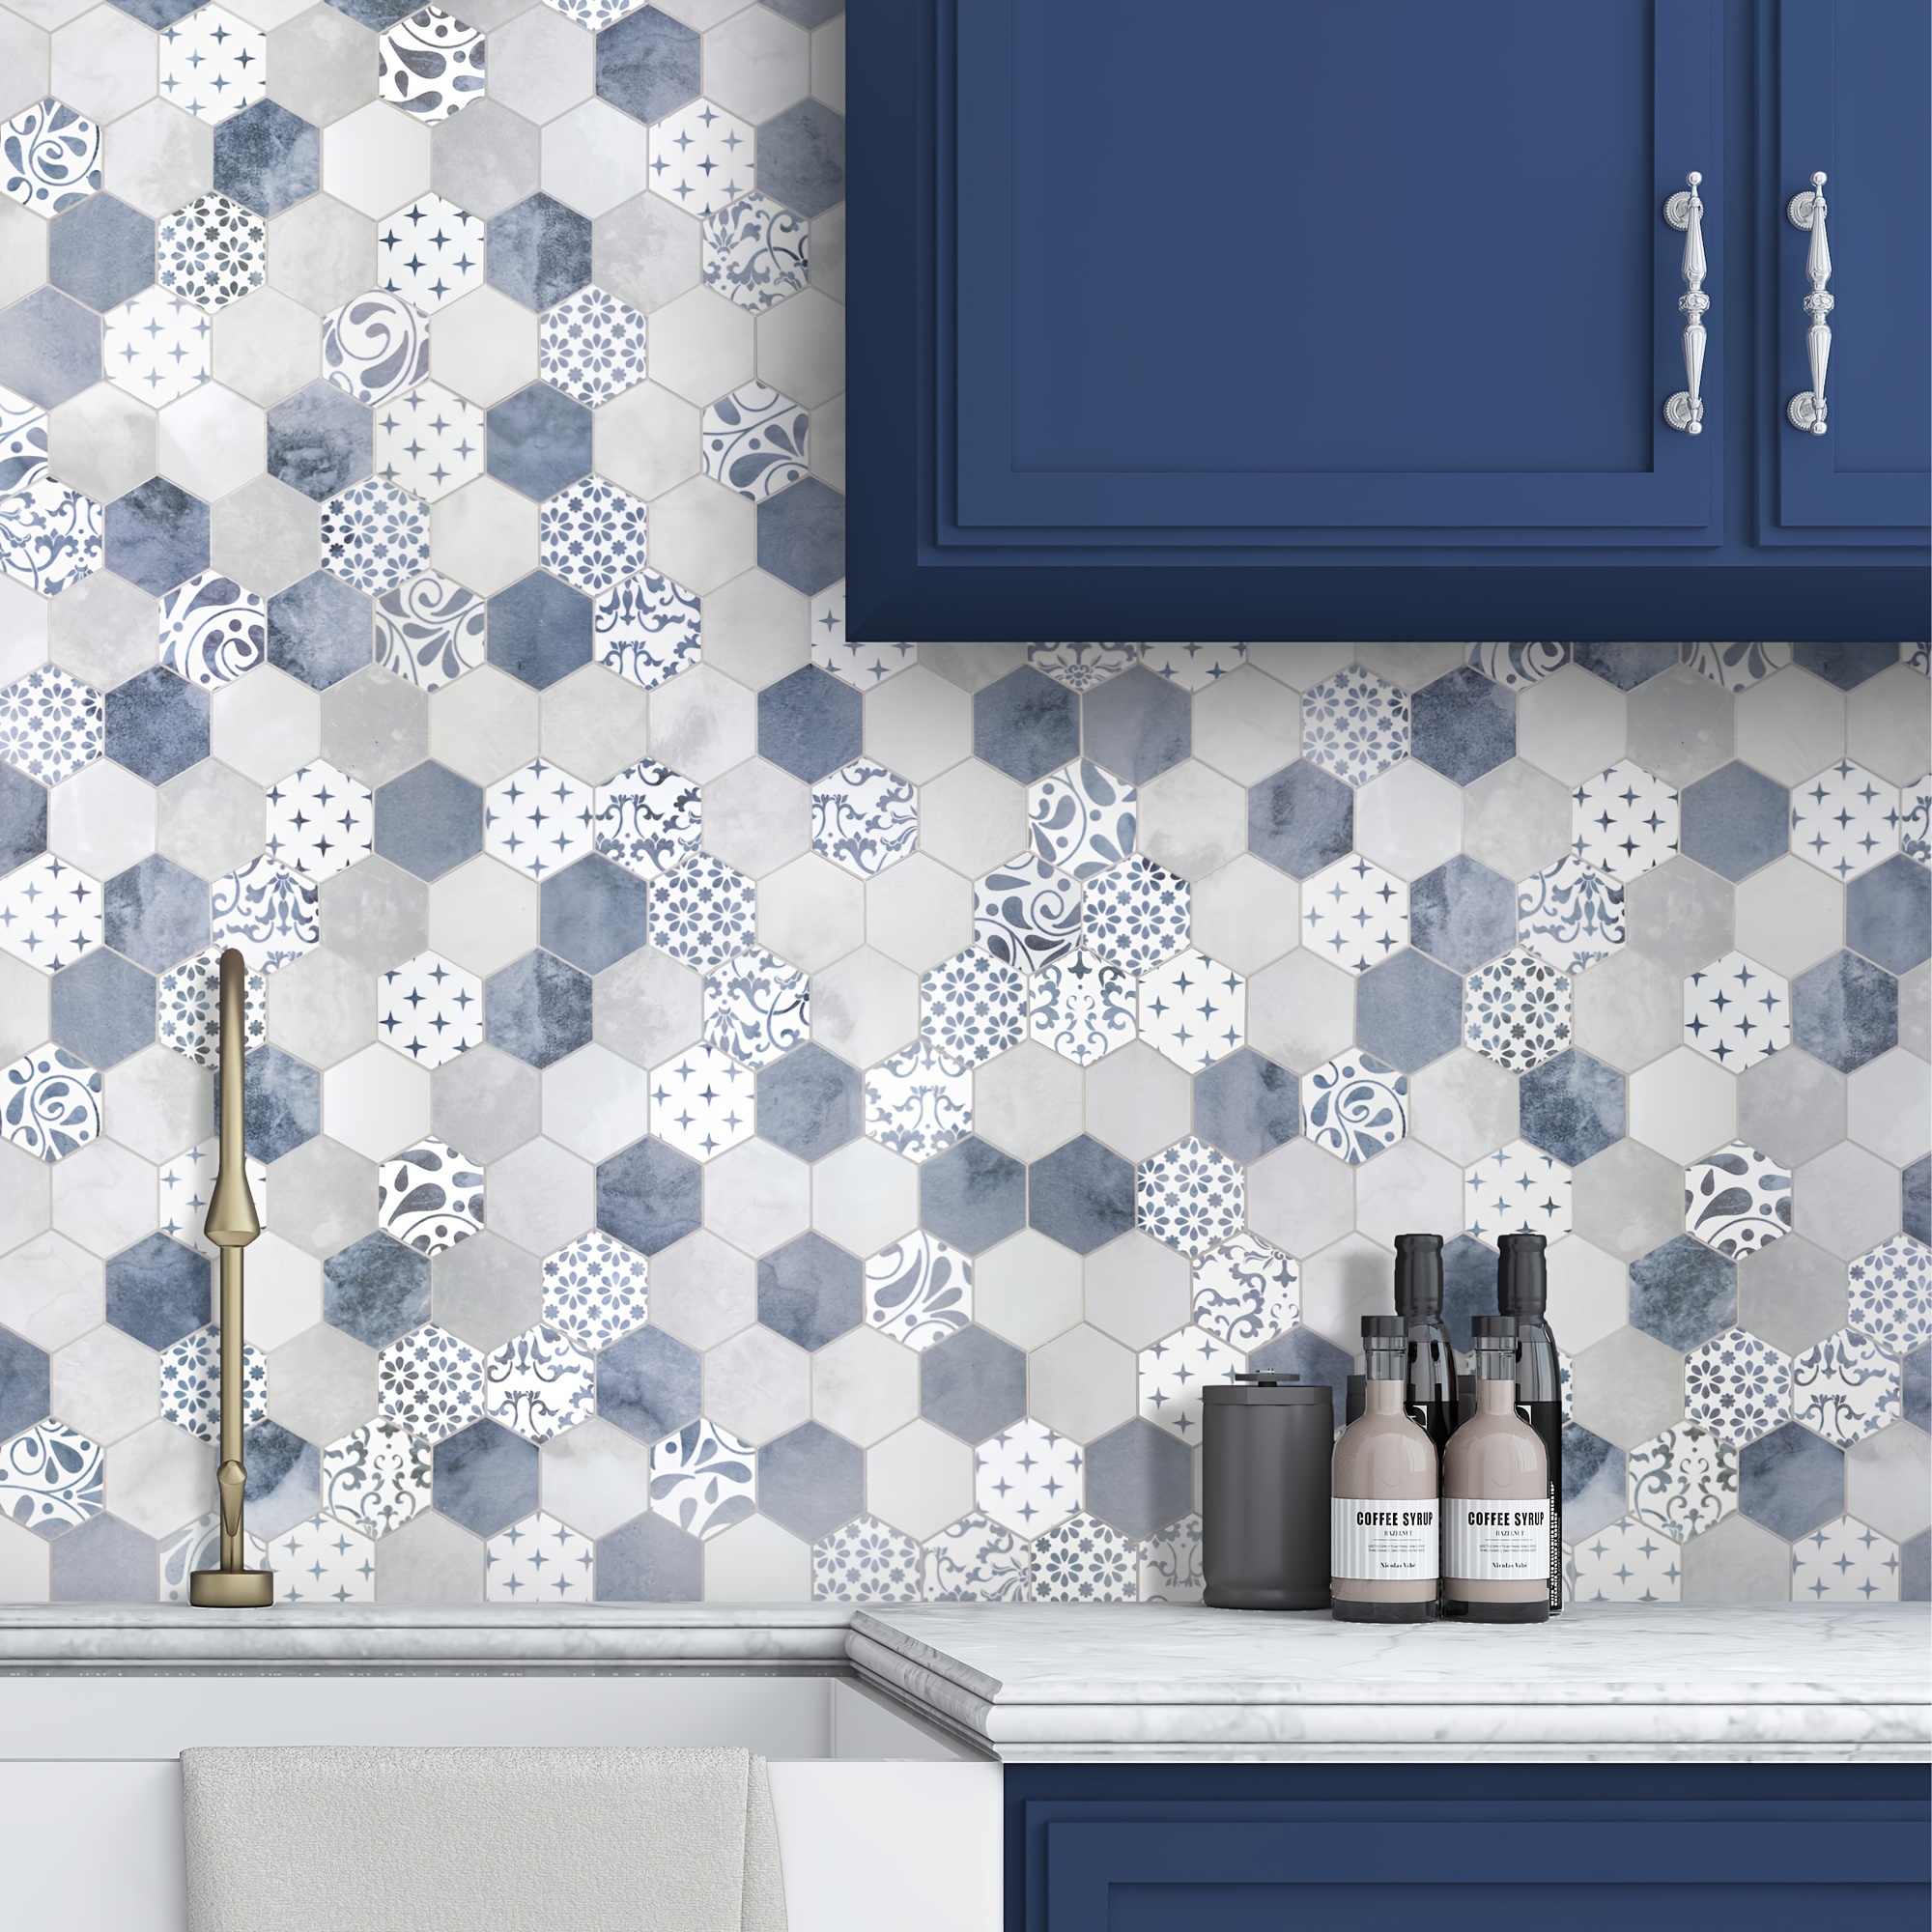 

10-piece Peel And Stick Backsplash Tile For Kitchen Bathroom 11.3 In. X 11.4 In. Hexagon Cement Vintage Stone Composite Self Adhesive Mosaic Wall Tiles, Blue